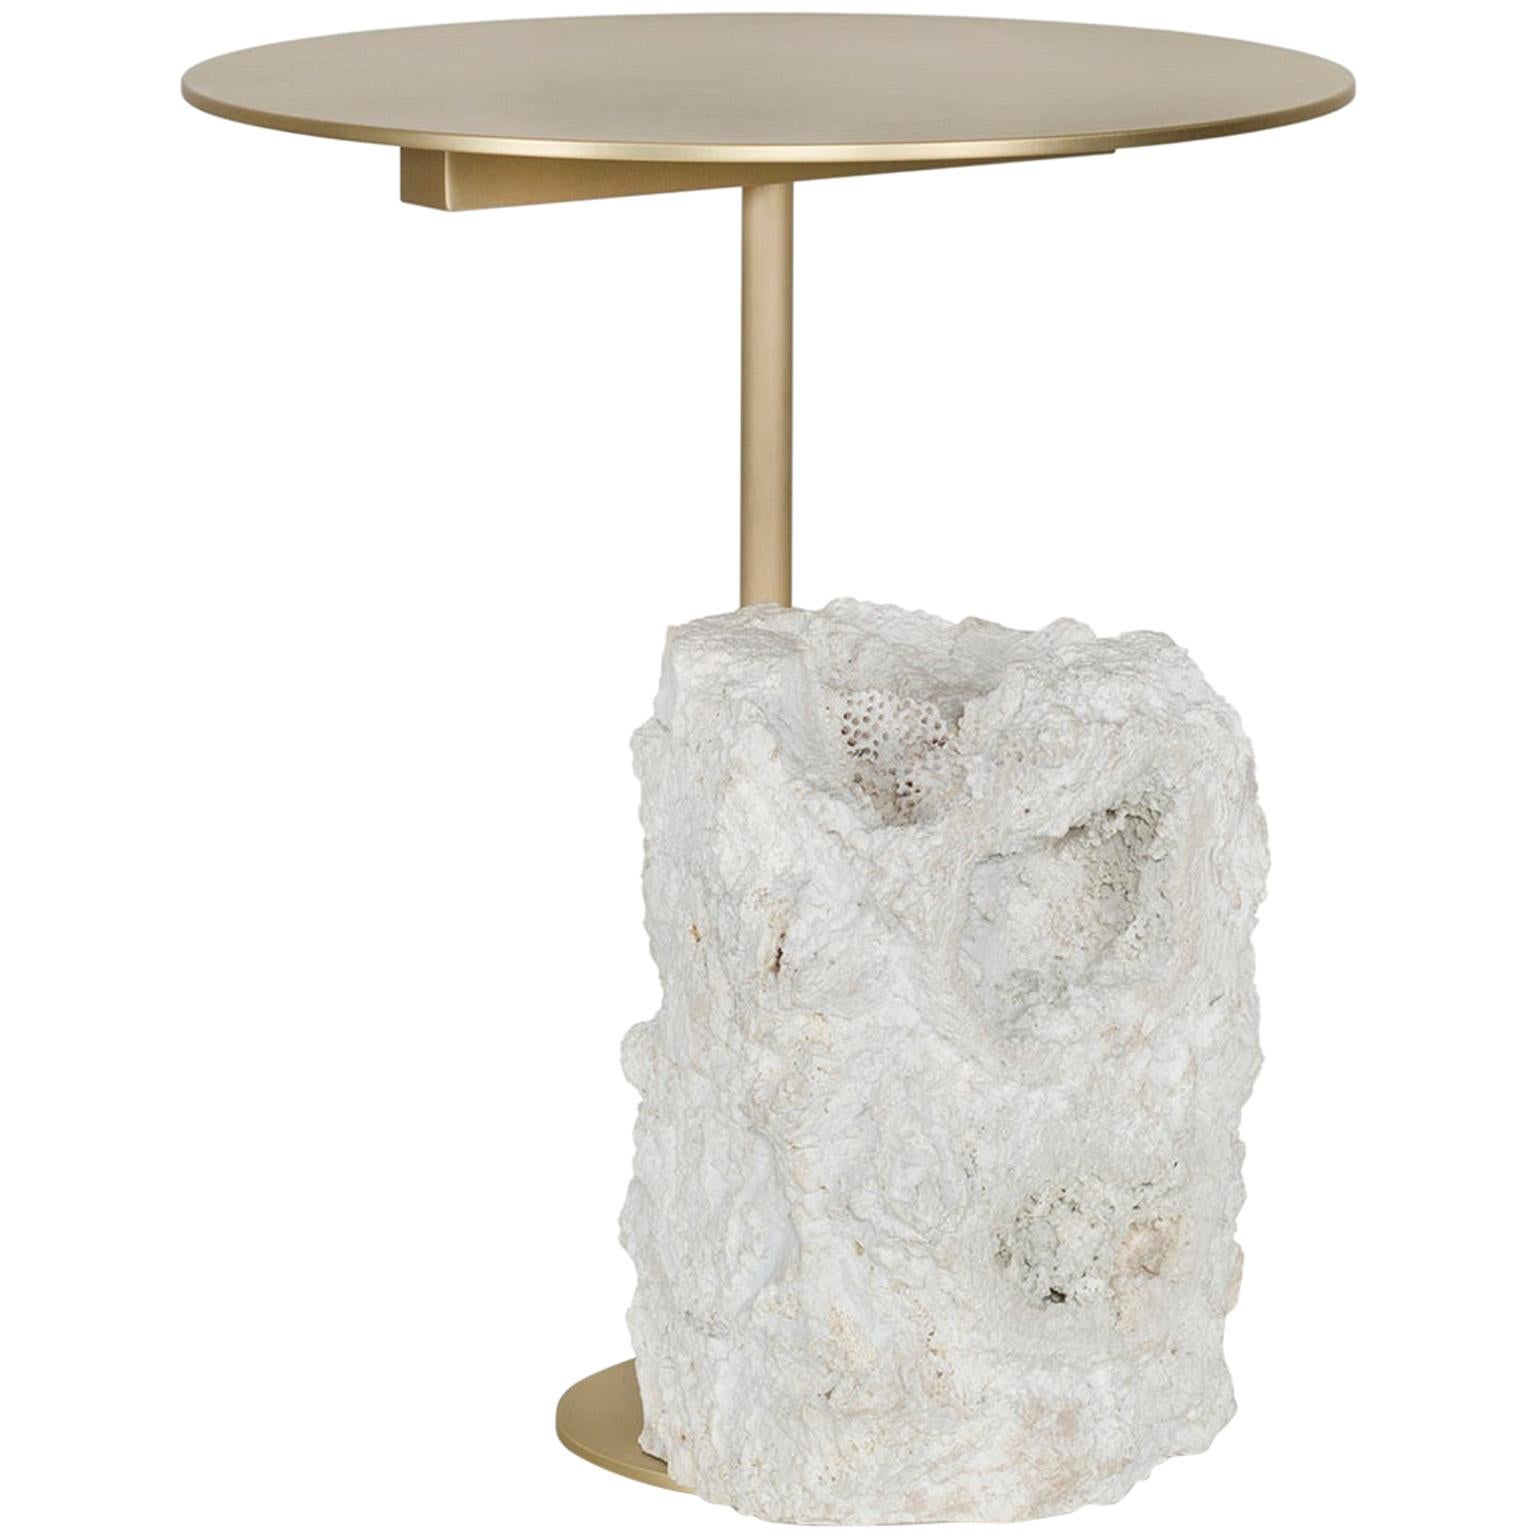 Organic Modern Pico Side Table Coral Stone Handmade in Portugal by Greenapple